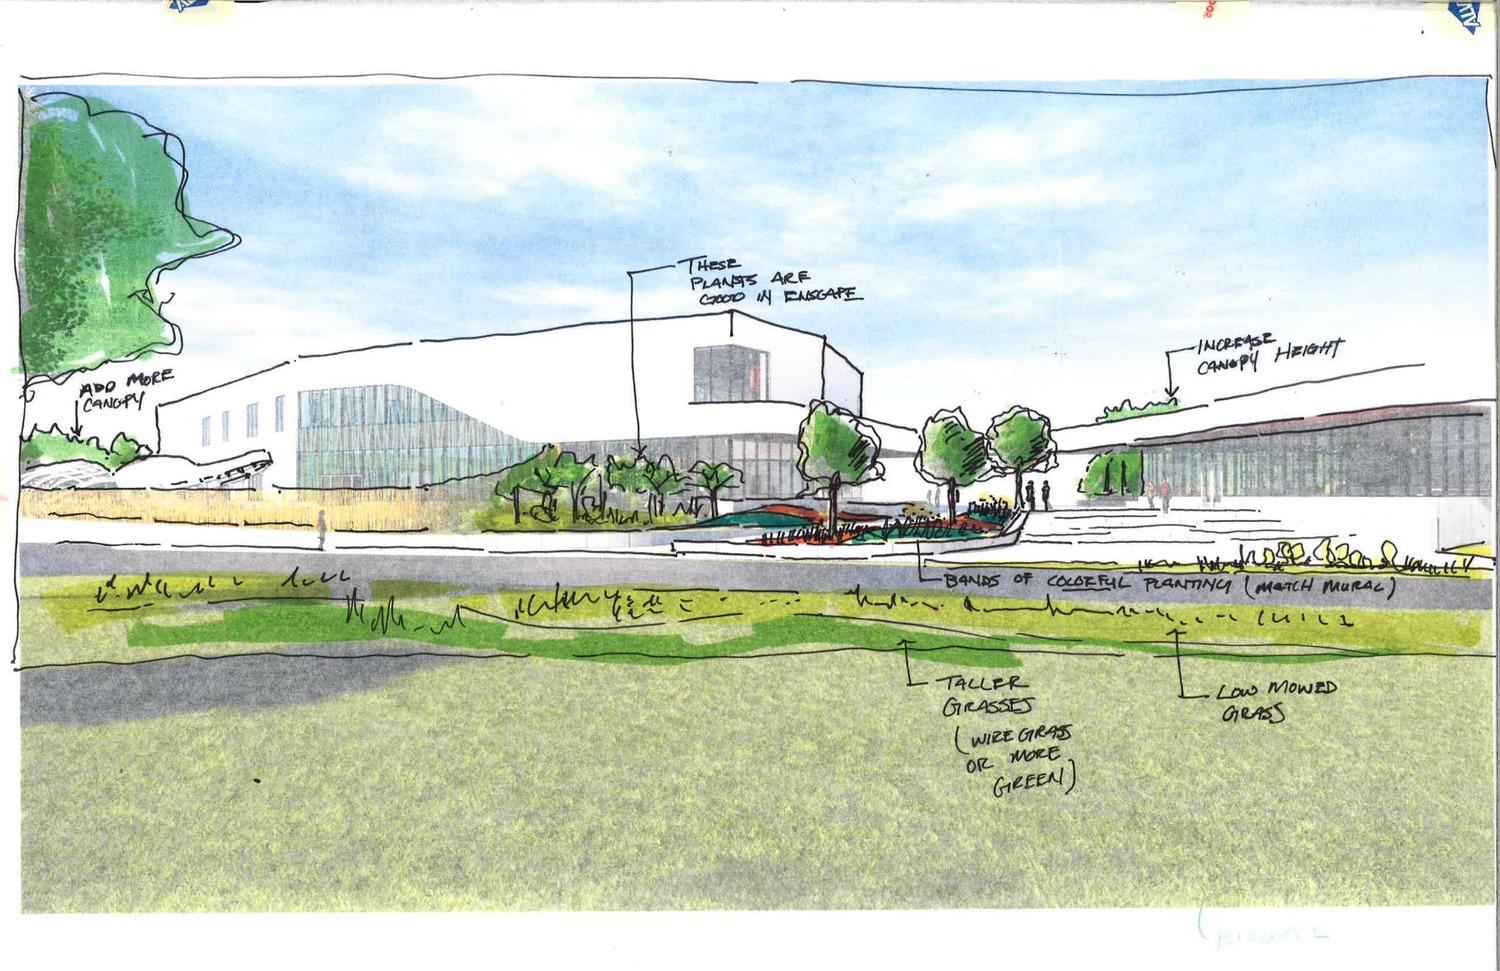 Colorful sketch of children's museum and surrounding landscape